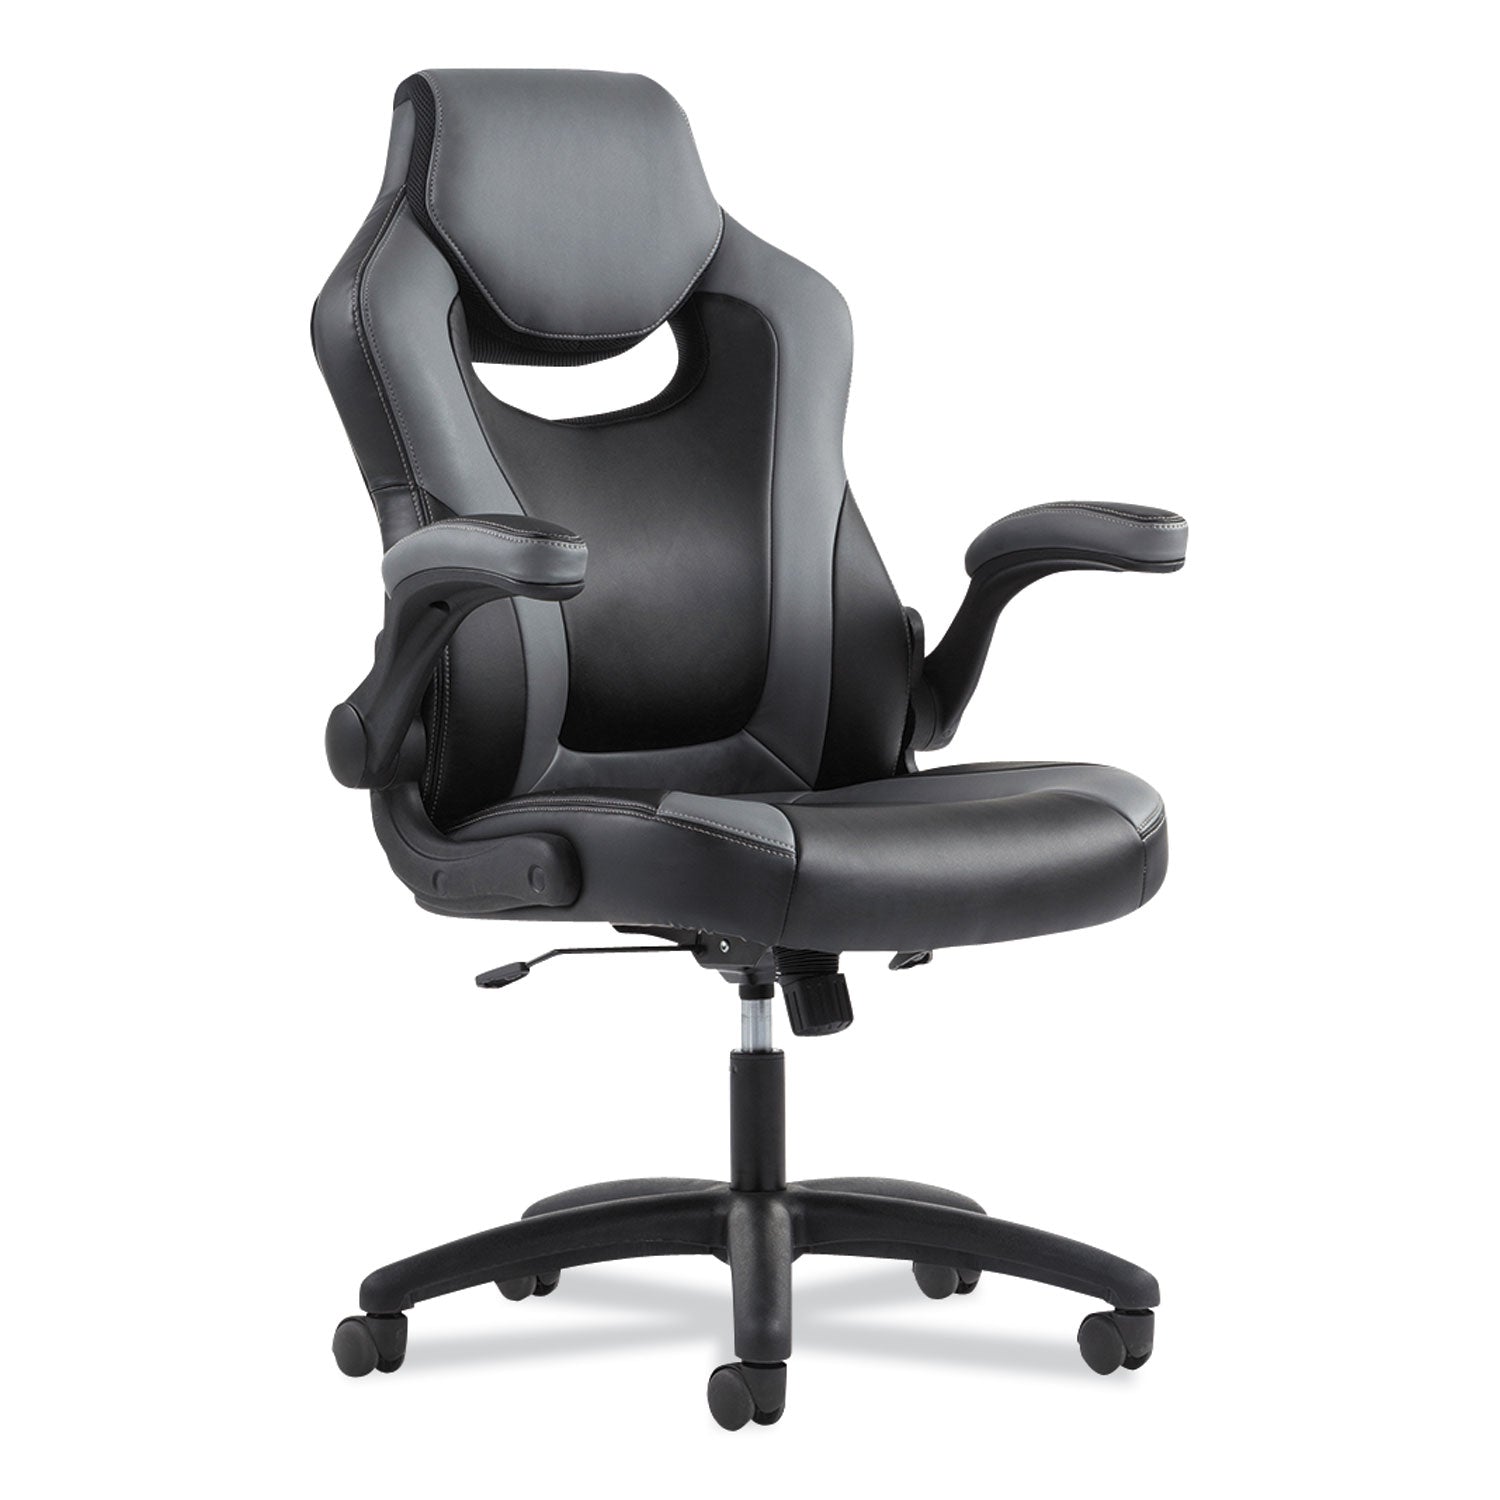 9-one-one-high-back-racing-style-chair-with-flip-up-arms-supports-up-to-225-lb-black-seat-gray-back-black-base_bsxvst911 - 1